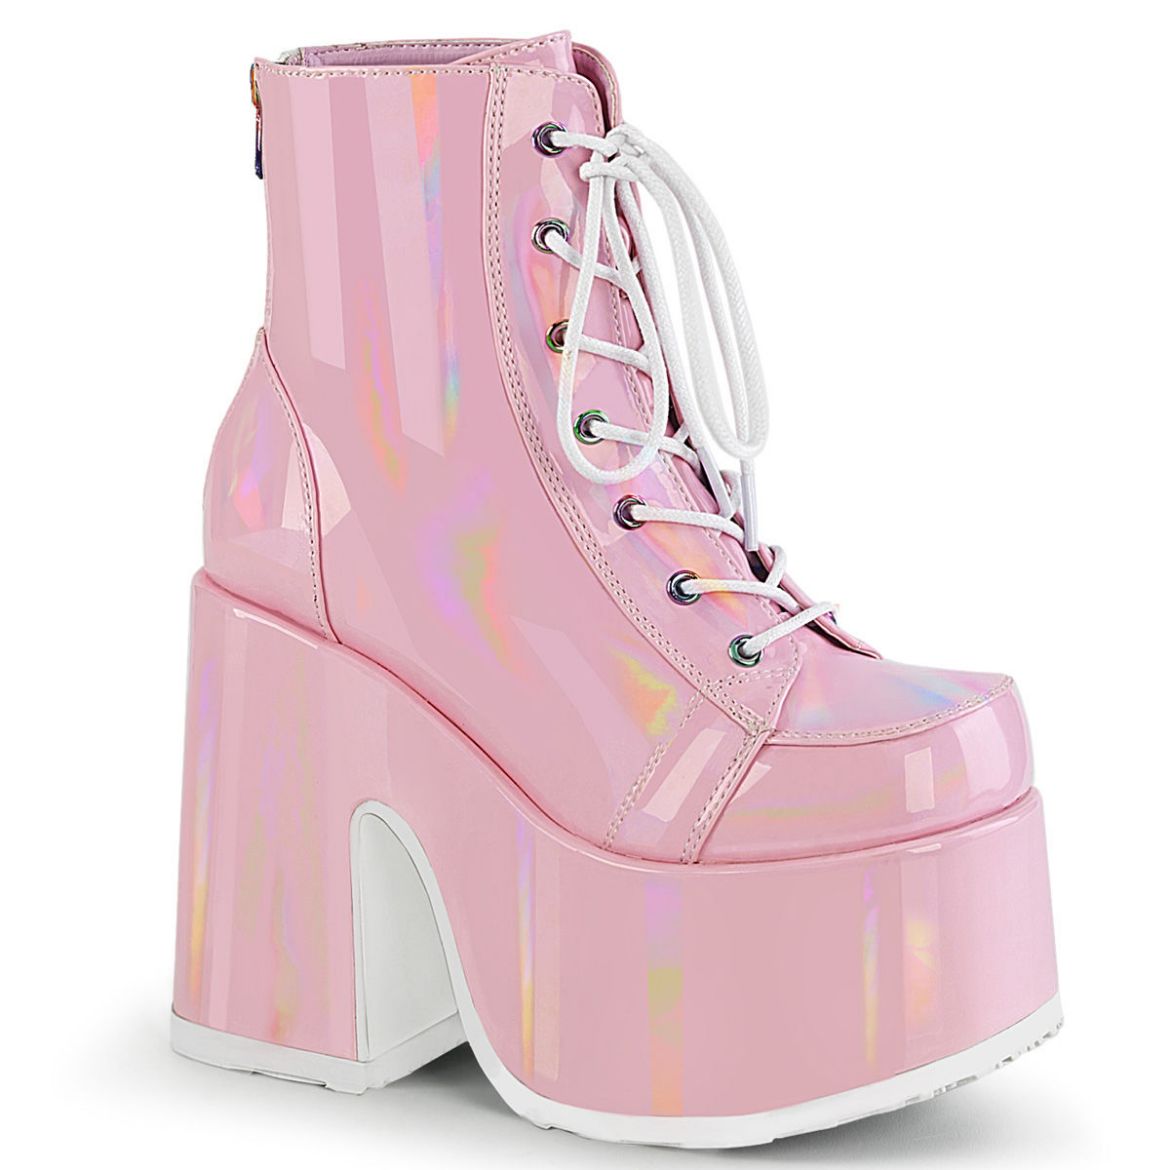 Product image of Demonia CAMEL-203 B.Pink Holographic 5 inch (12.7 cm) Chunky Heel 3 inch (7.6 cm) P/F Lace-Up Ankle Boot Metal Back Zip